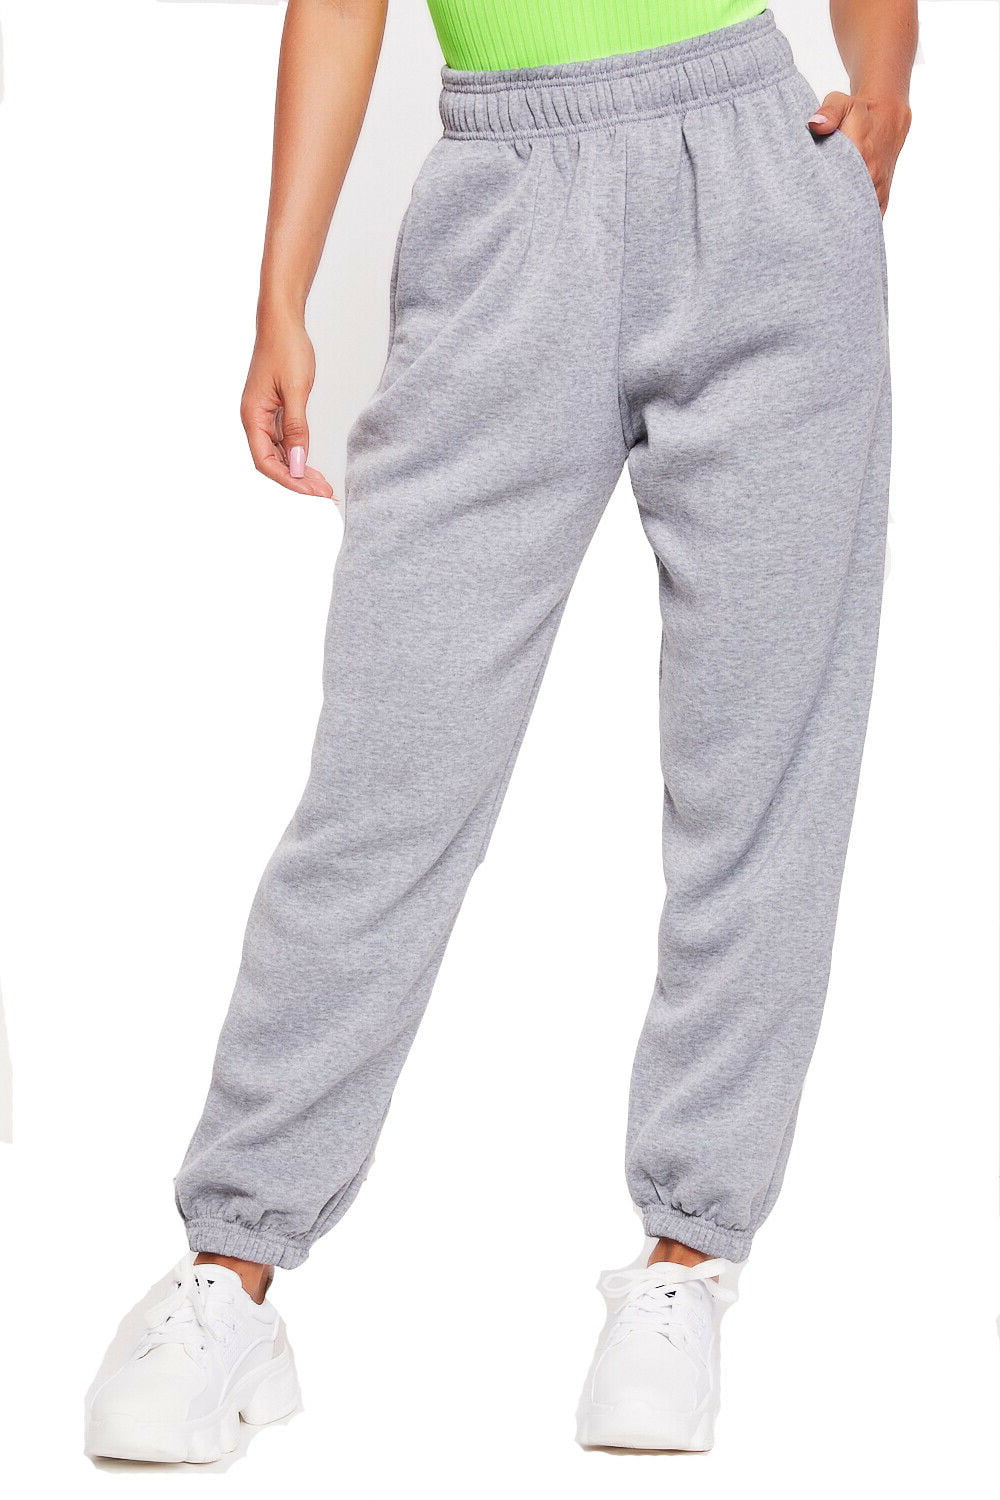 Women Casual Solid Color Sport Pants, Elastic Waist Ankle Cuff Loose  Sweatpants with Pocket